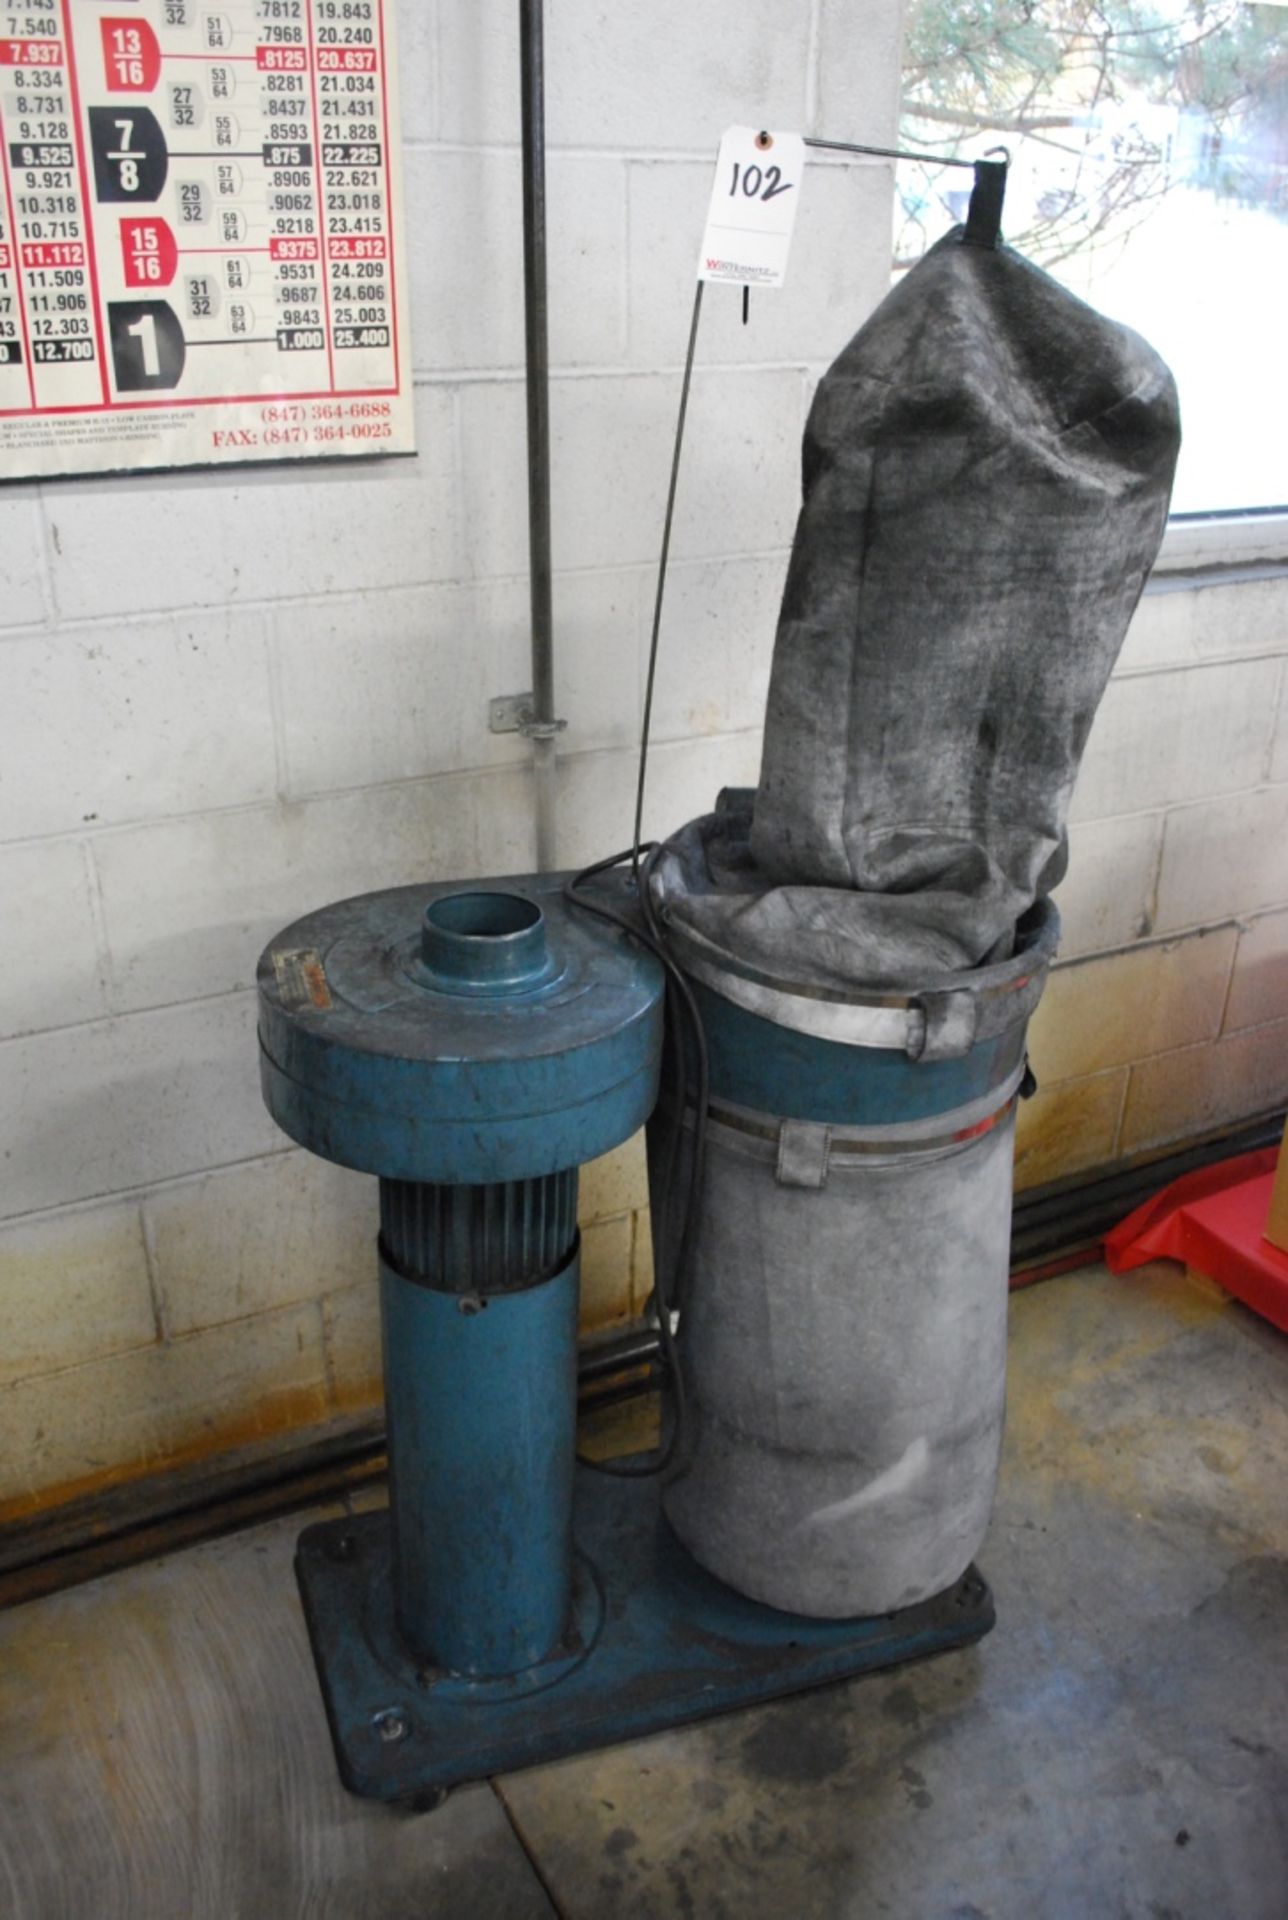 JET MODEL DC-650 SINGLE UNIT DUST COLLECTOR: S/N 70623323; Stock No. 708621; 1 HP; 115/230V